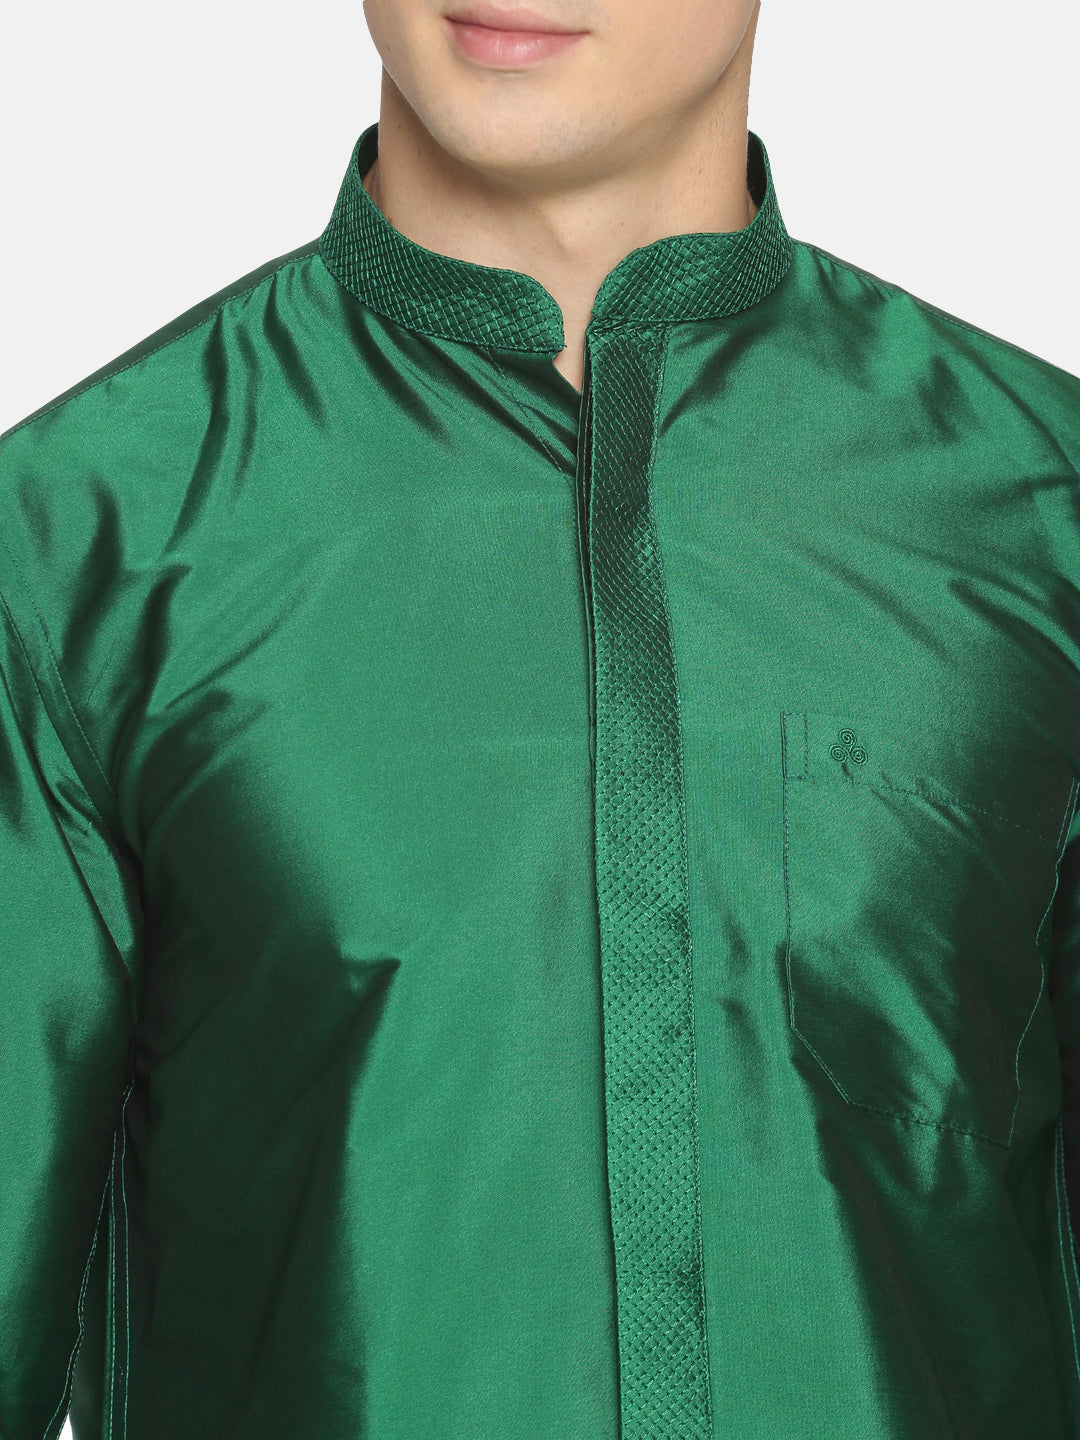 Green Polyester Slim Fit Solid Party Shirt